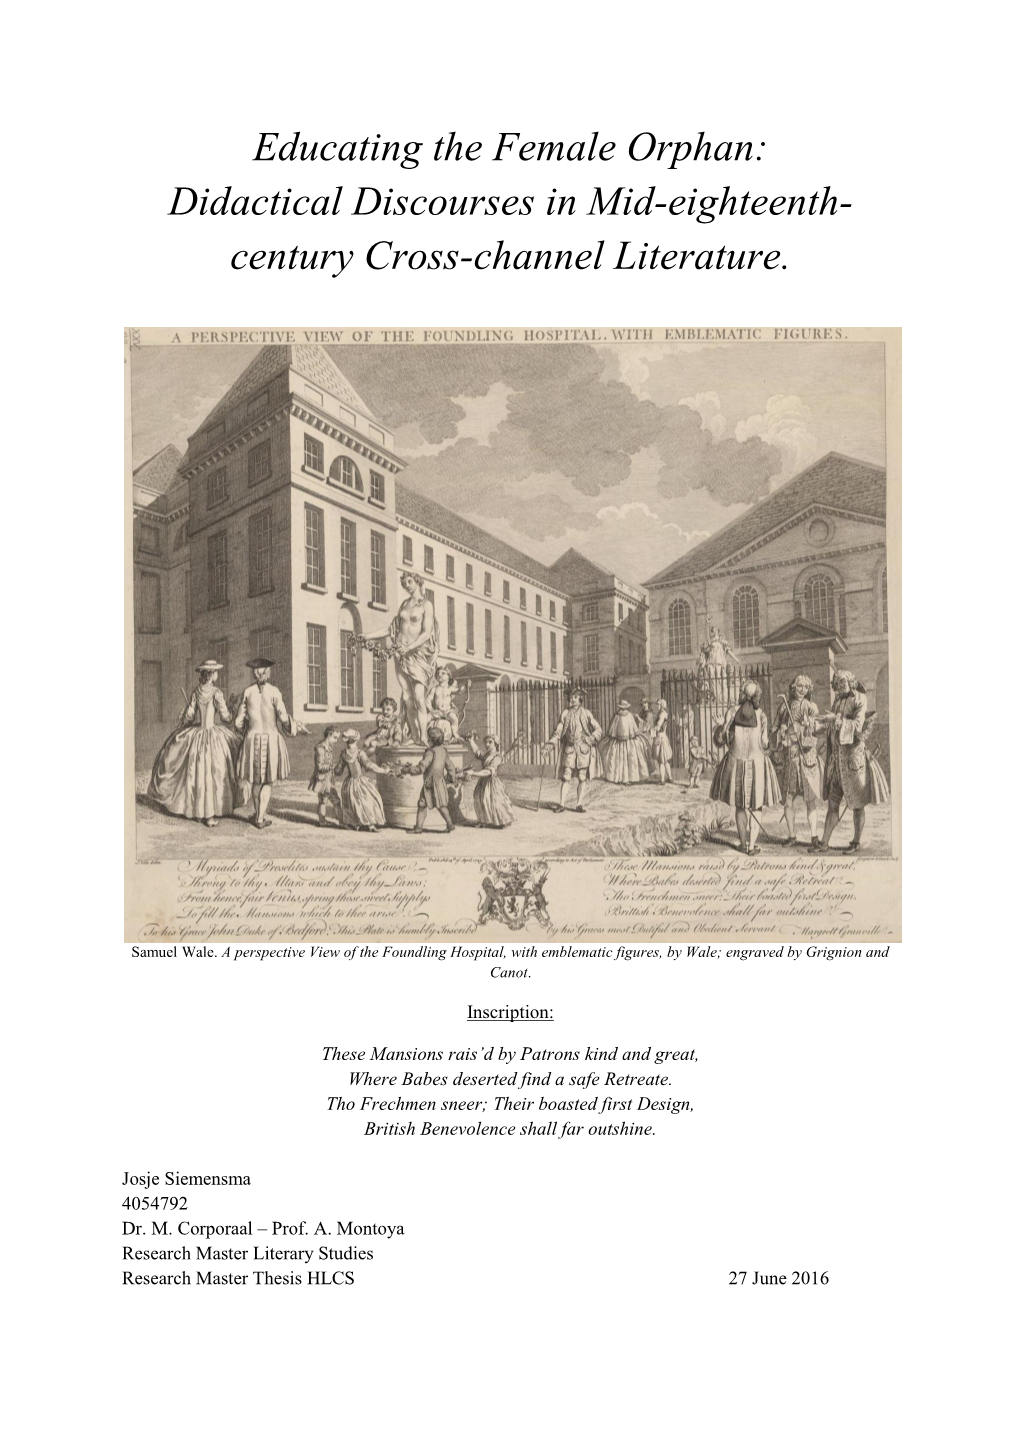 Educating the Female Orphan: Didactical Discourses in Mid-Eighteenth- Century Cross-Channel Literature